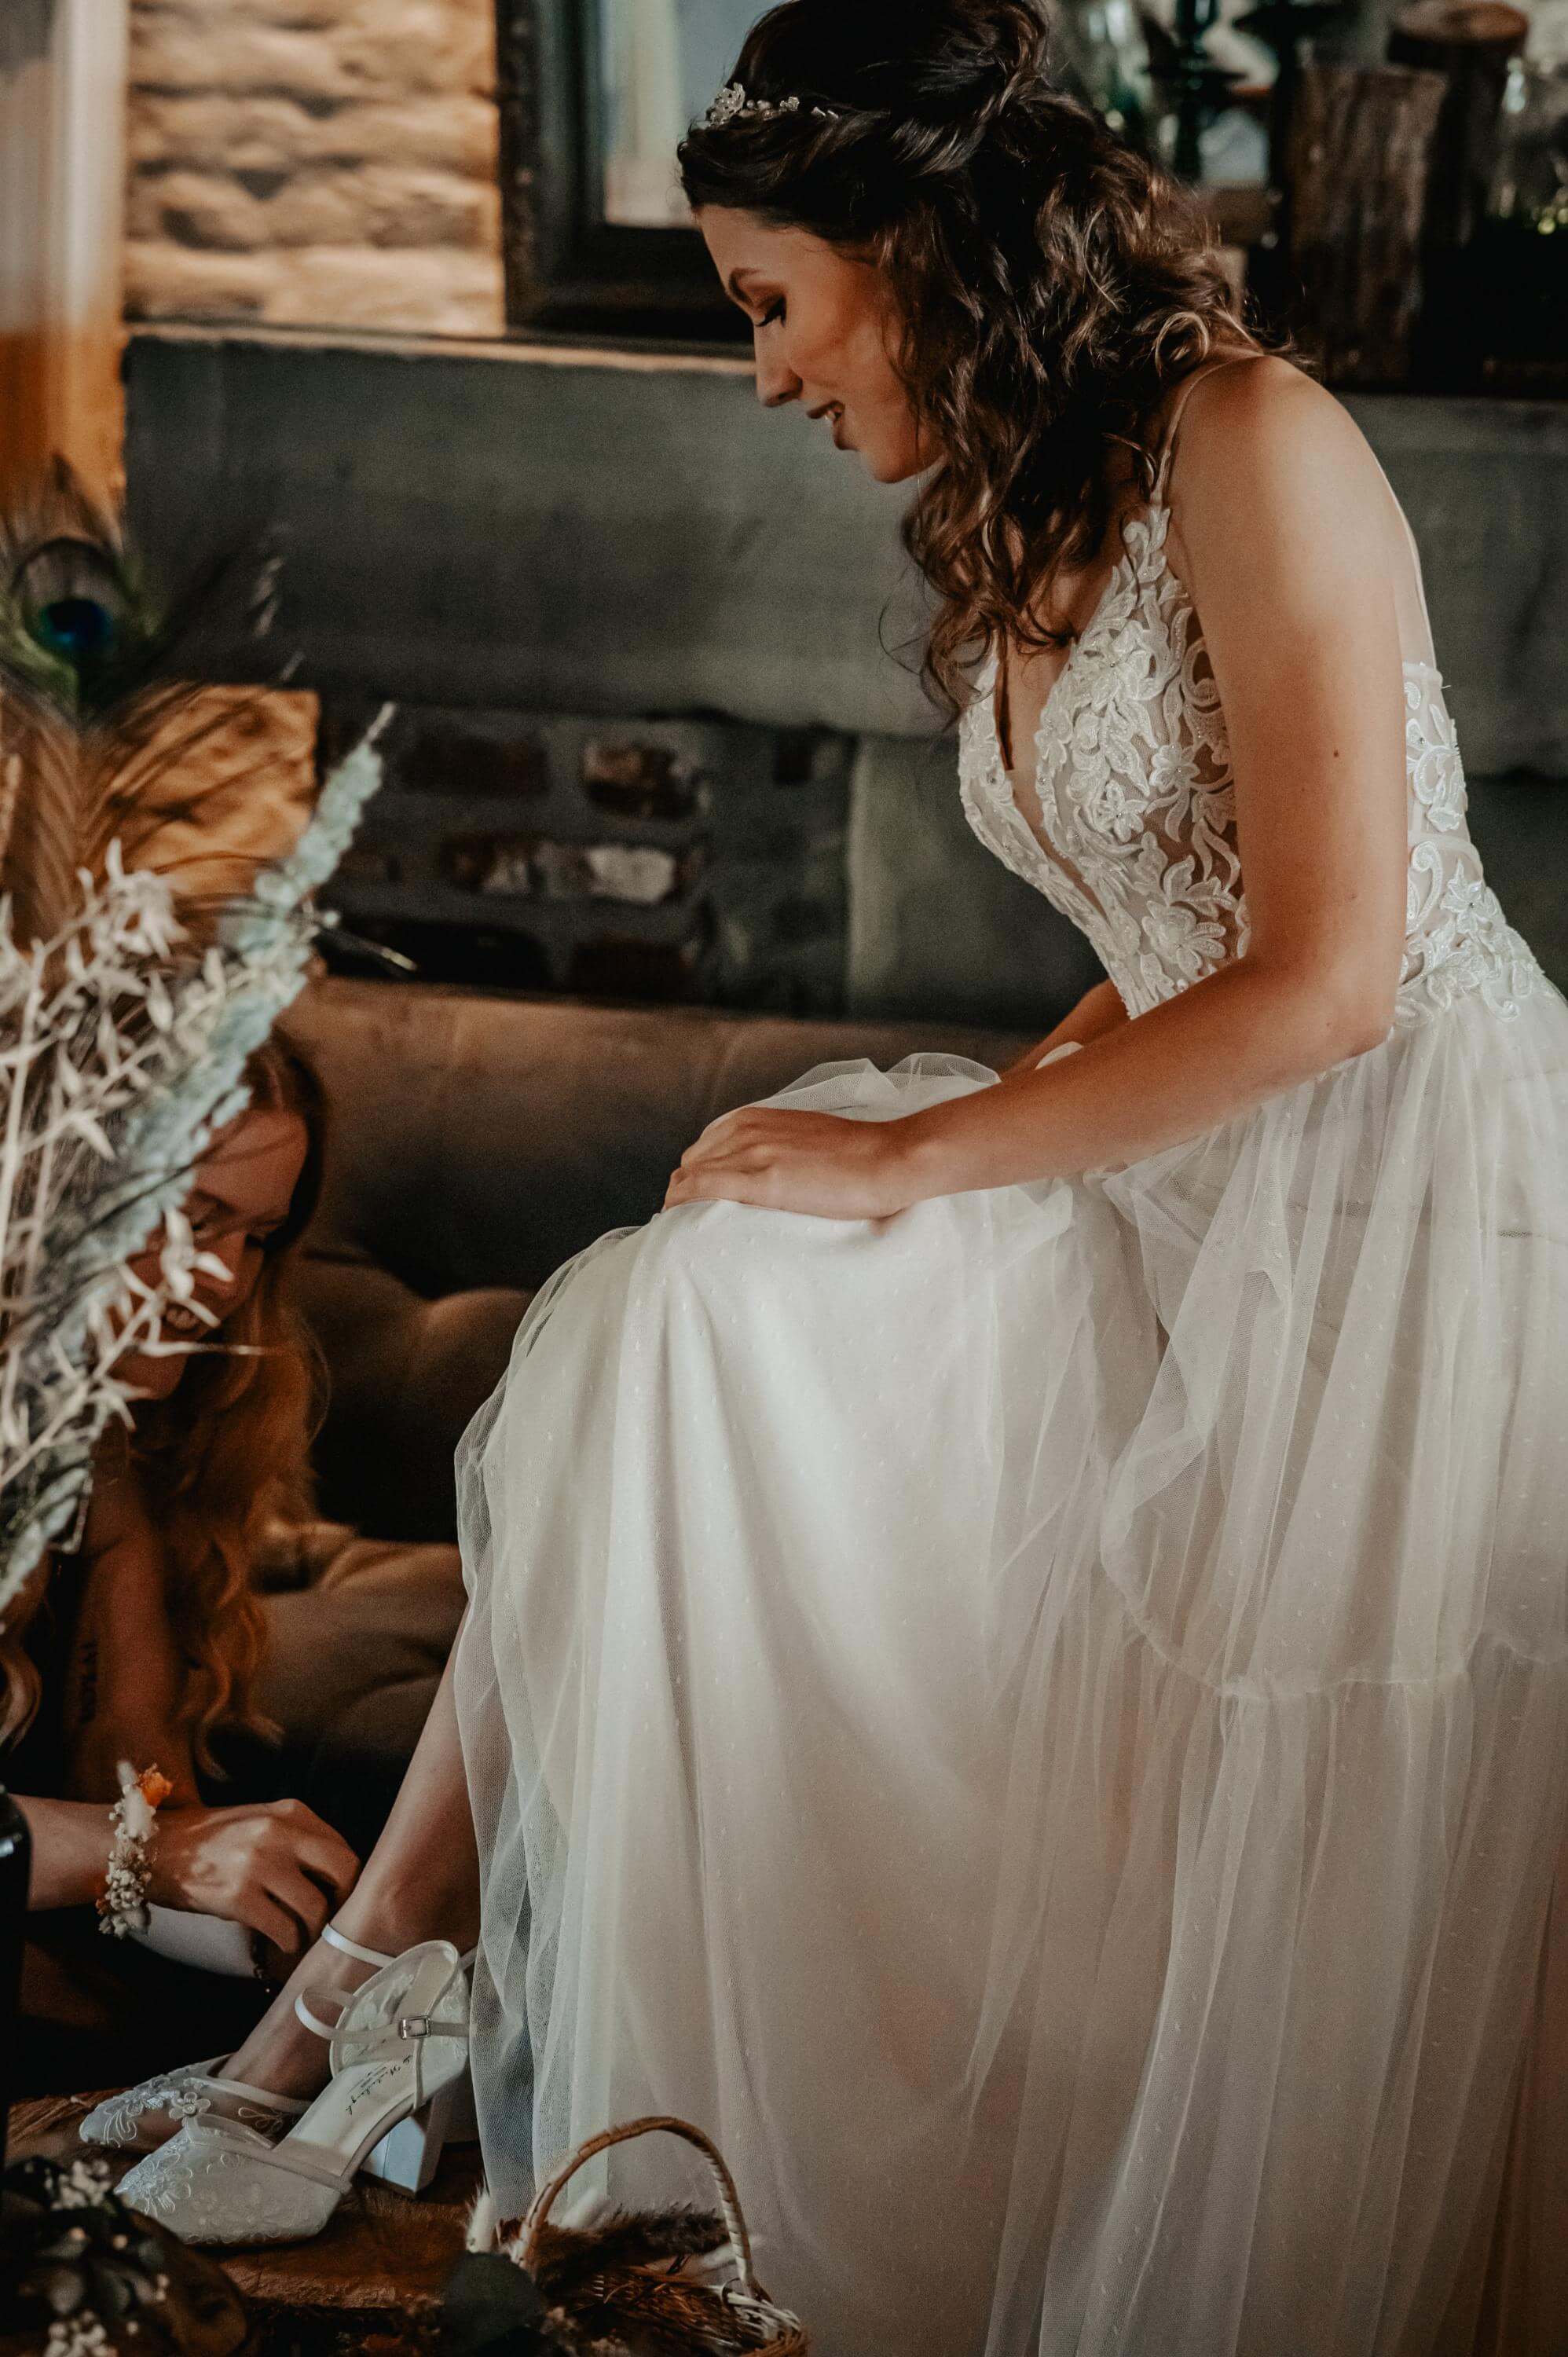 When getting ready, the bride sits in her wedding dress and puts on her half-height open shoes.